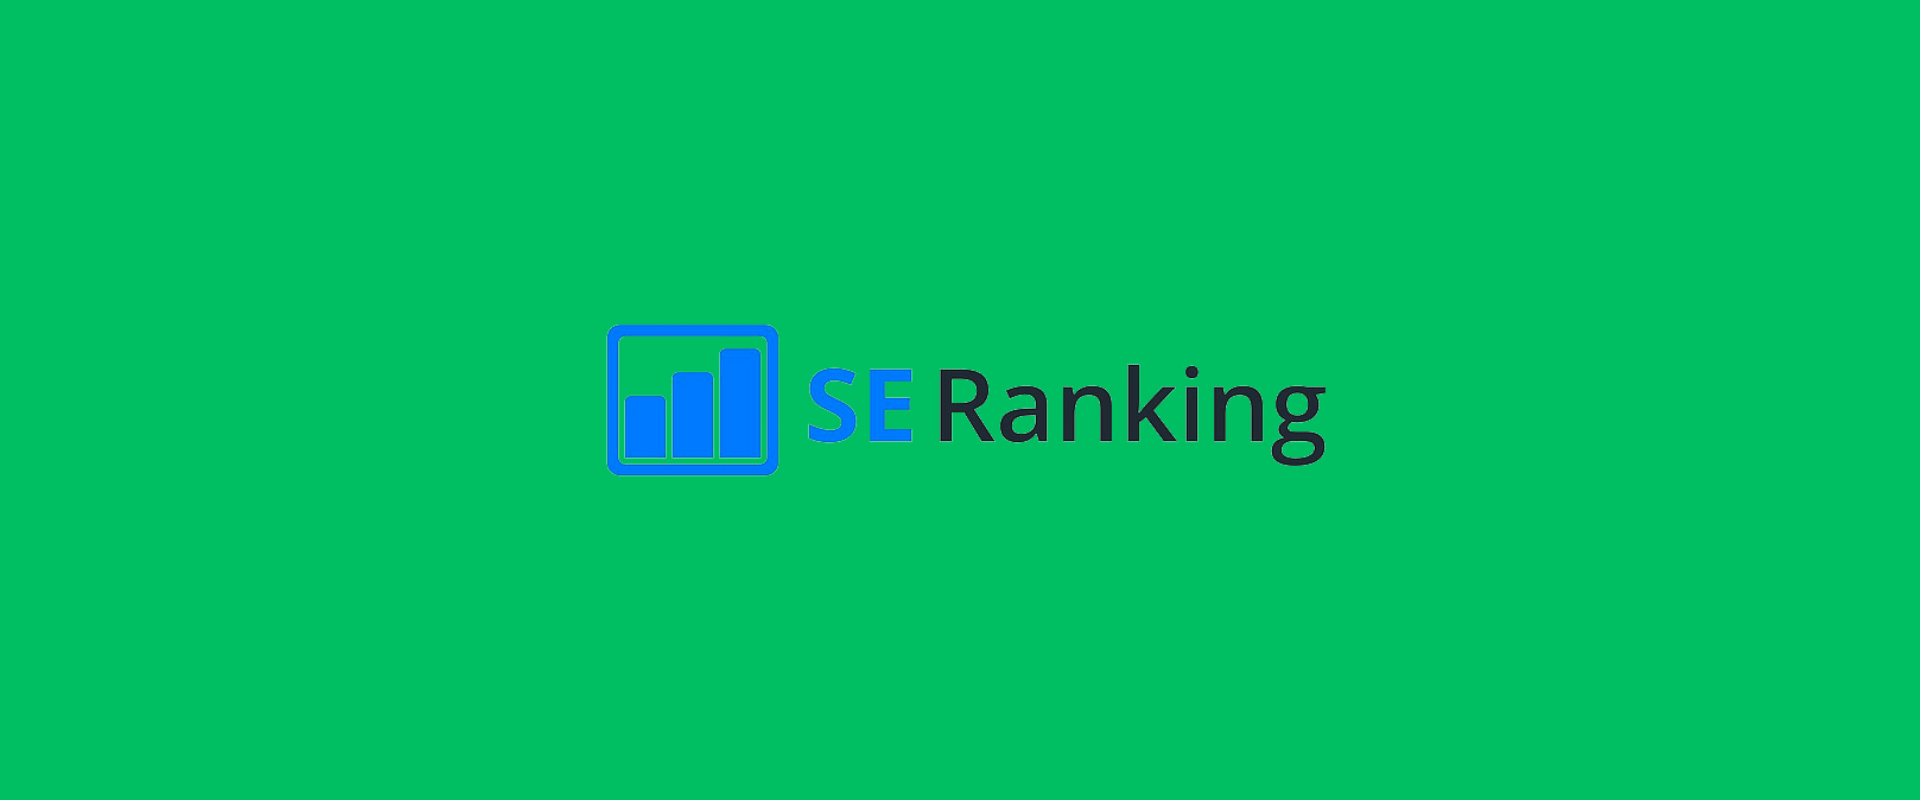 SE Ranking Review - Mastering Search Engine Rankings